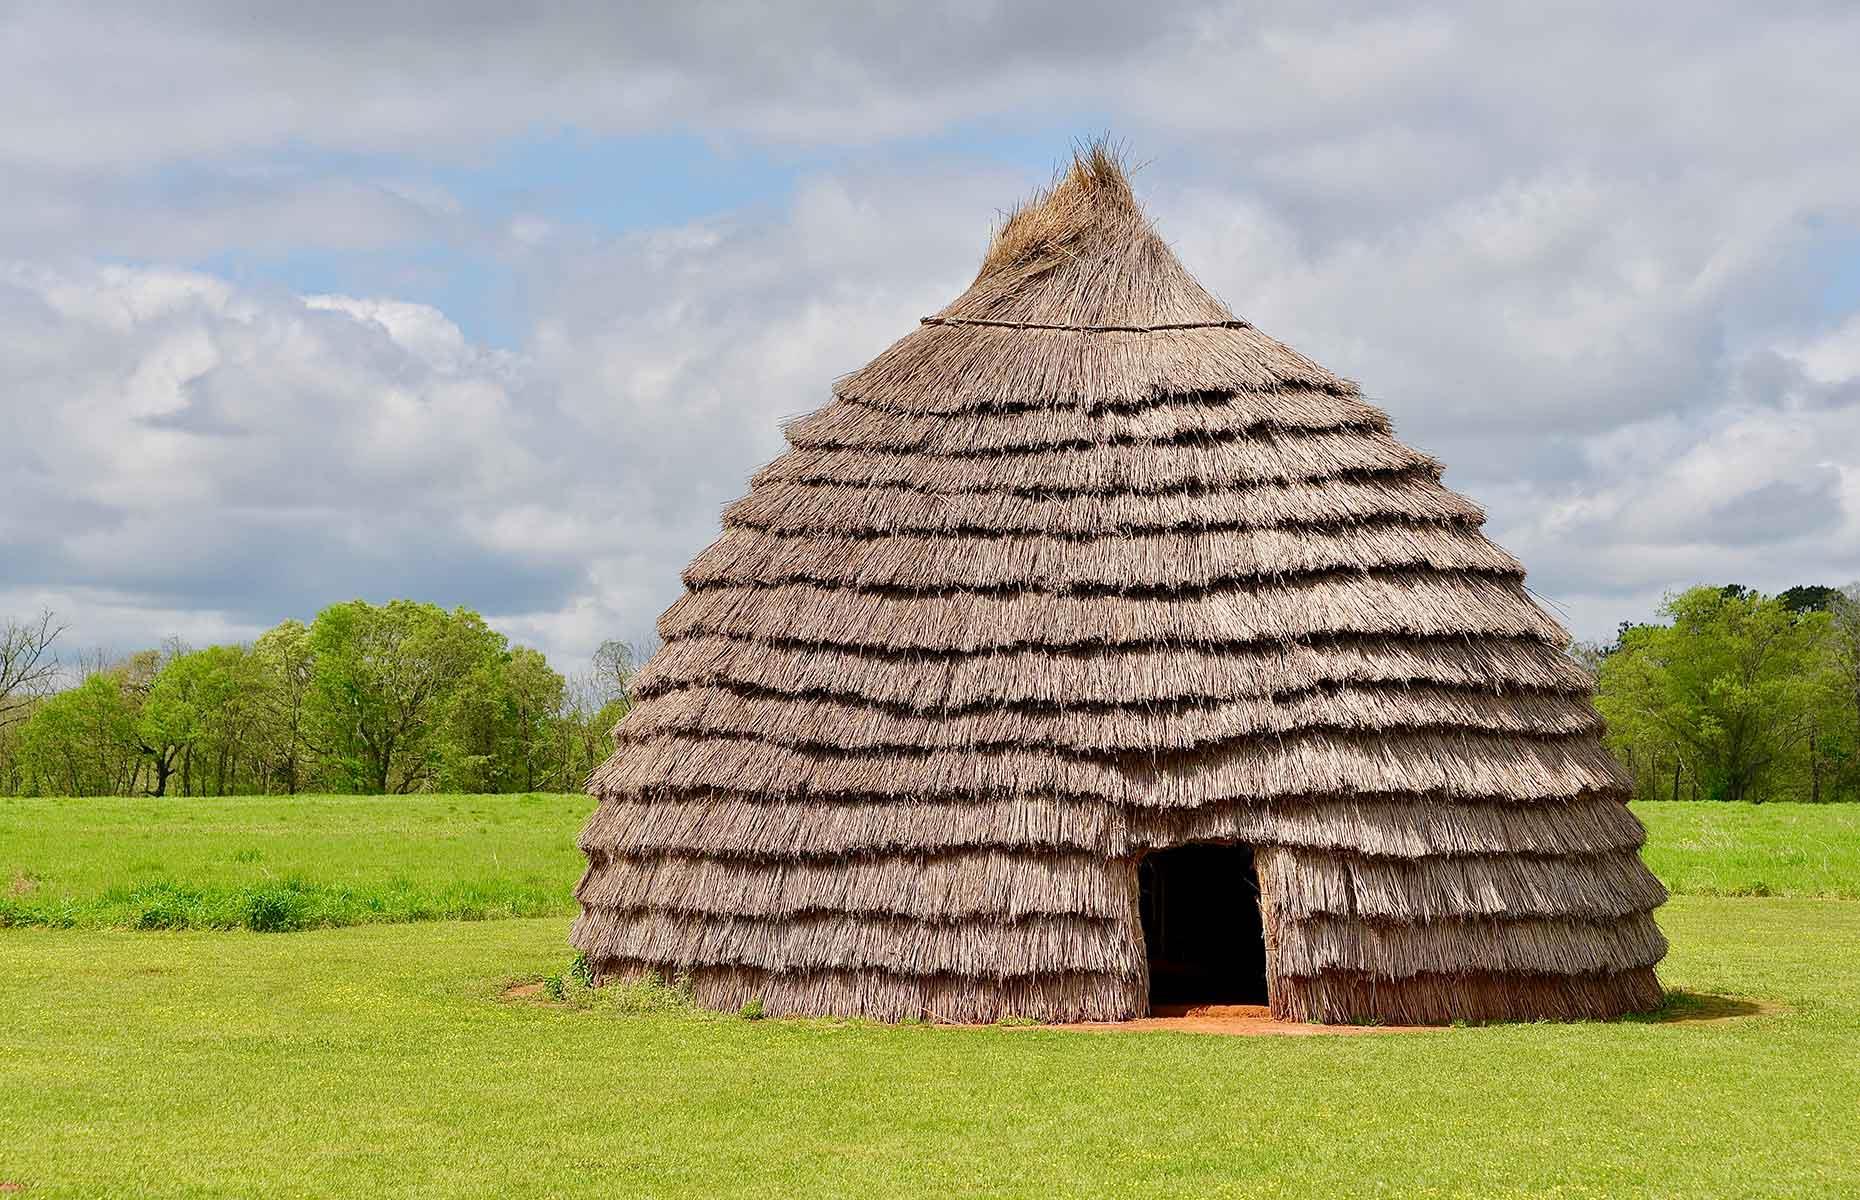 <p>The Caddo people <a href="https://www.thc.texas.gov/historic-sites/caddo-mounds/caddo-mounds-history">established a village</a> and ceremonial center here around AD 800, before abandoning the site in the 13th century. You could easily spend hours at the Caddo Mounds State Historic Site, where you can see two temple mounds and one burial mound via a walking trail, step inside a reconstructed dwelling (like the one pictured here) and explore the <a href="https://www.facebook.com/visitcaddomounds/">visitor center's</a> exhibits and displays about the early Caddo people's everyday life.</p>  <p><a href="https://www.loveexploring.com/galleries/156652/abandoned-places-in-texas-that-time-forgot?page=1"><strong>Discover abandoned places in Texas that time forgot</strong></a></p>